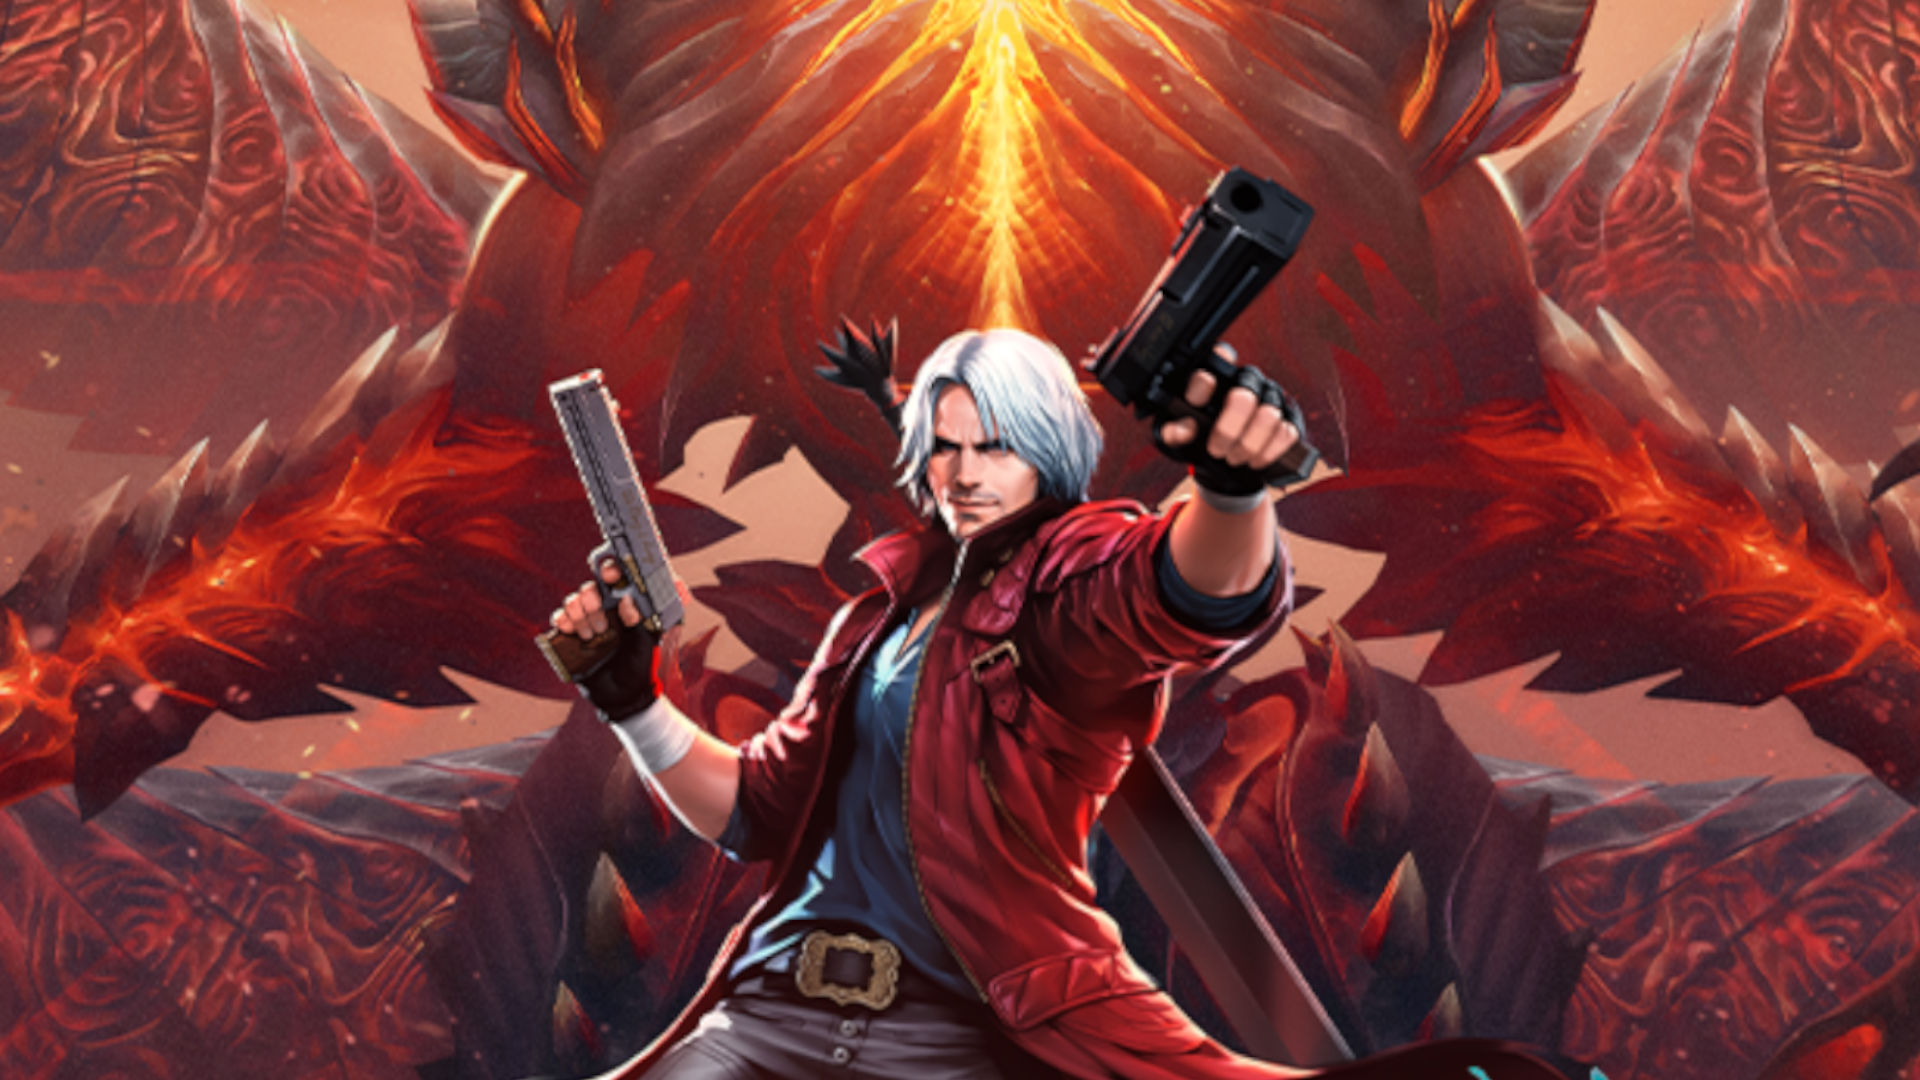 Is Dante, from the Devil May Cry series, based on a real demon